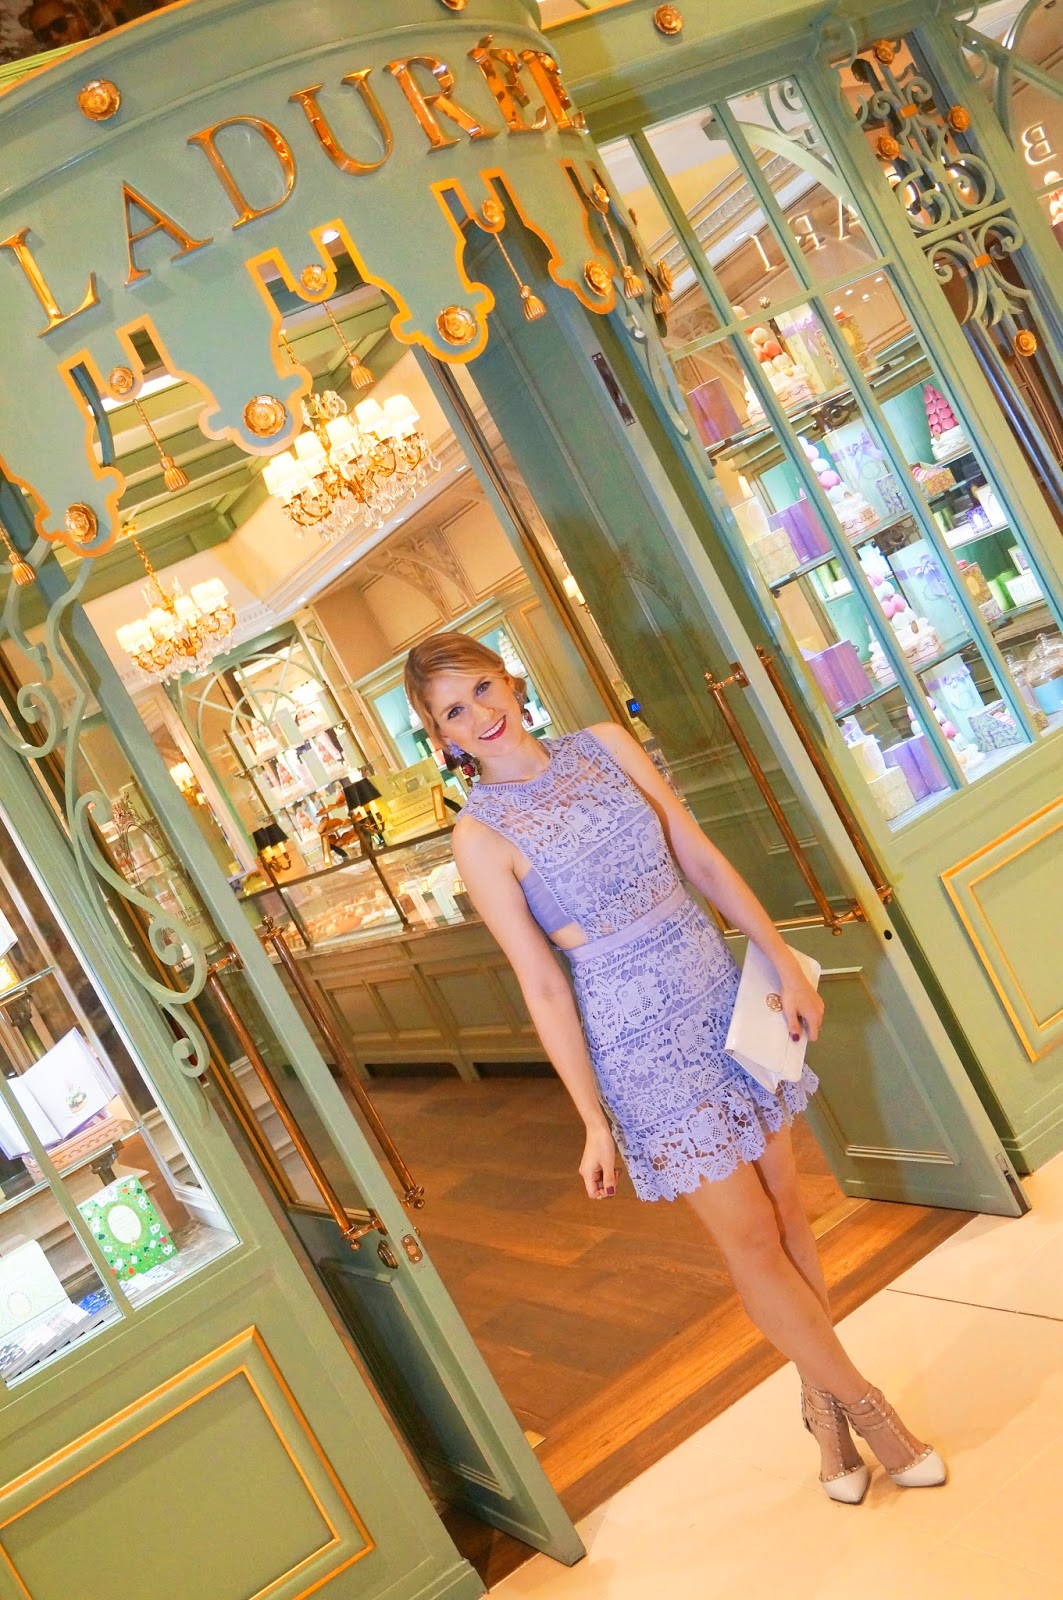 The beautiful french bakery Ladurée in Panama City